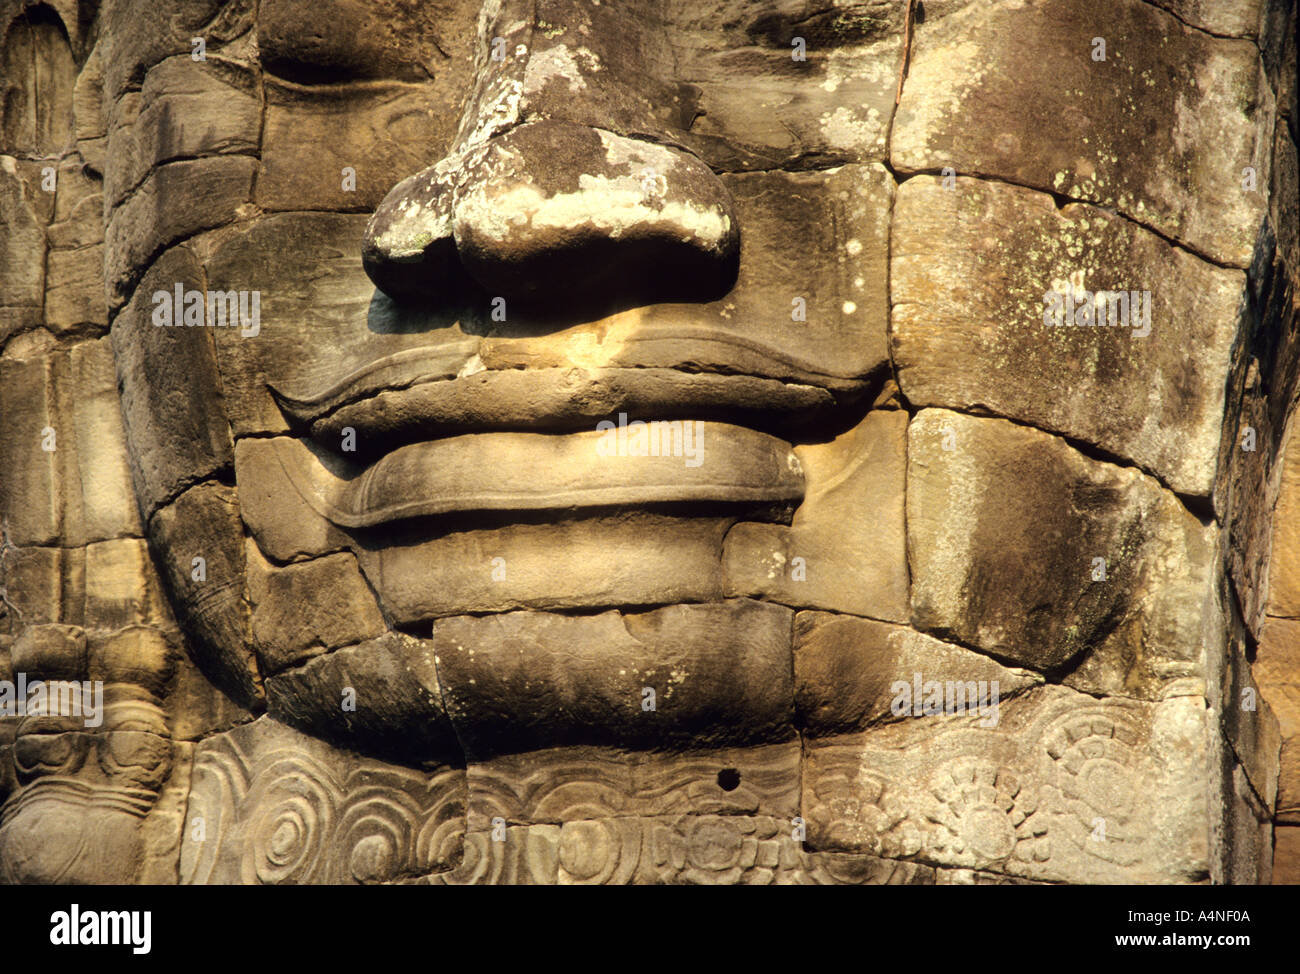 The Smile on the Face of the  huge Buddha head at Angkor Thom in Cambodia Stock Photo